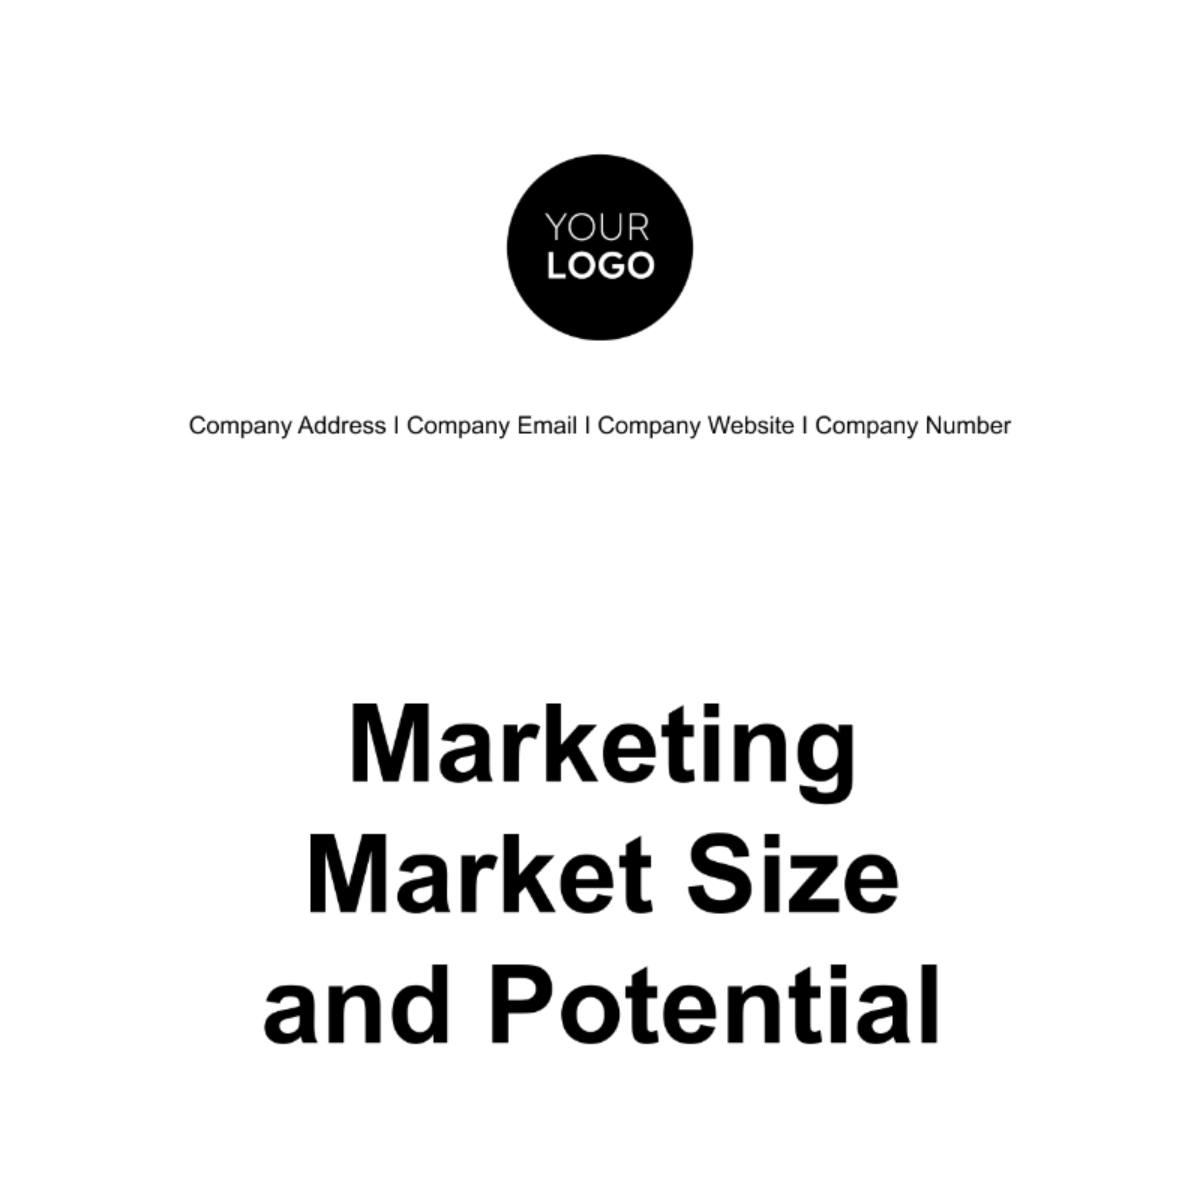 Marketing Market Size and Potential Template